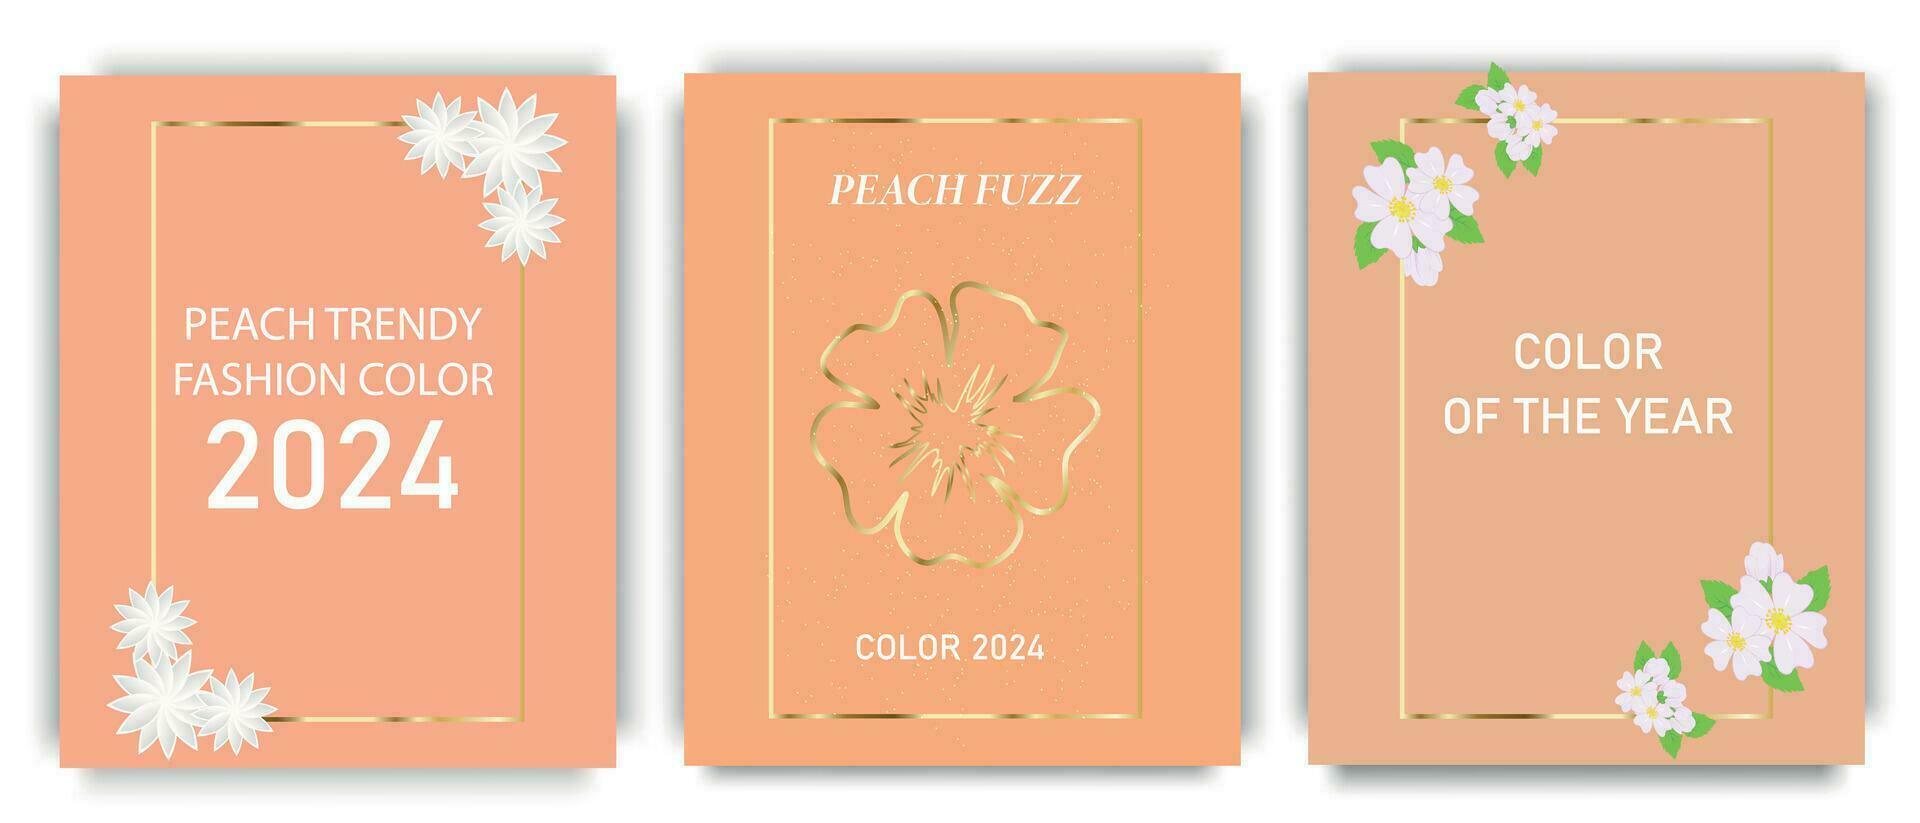 A set of minimal posters in a trendy peach color palette with gold decoration. Fashionable color of 2024.Golden frame with flowers. Peach is a new trend, color of the year. Vector illustration